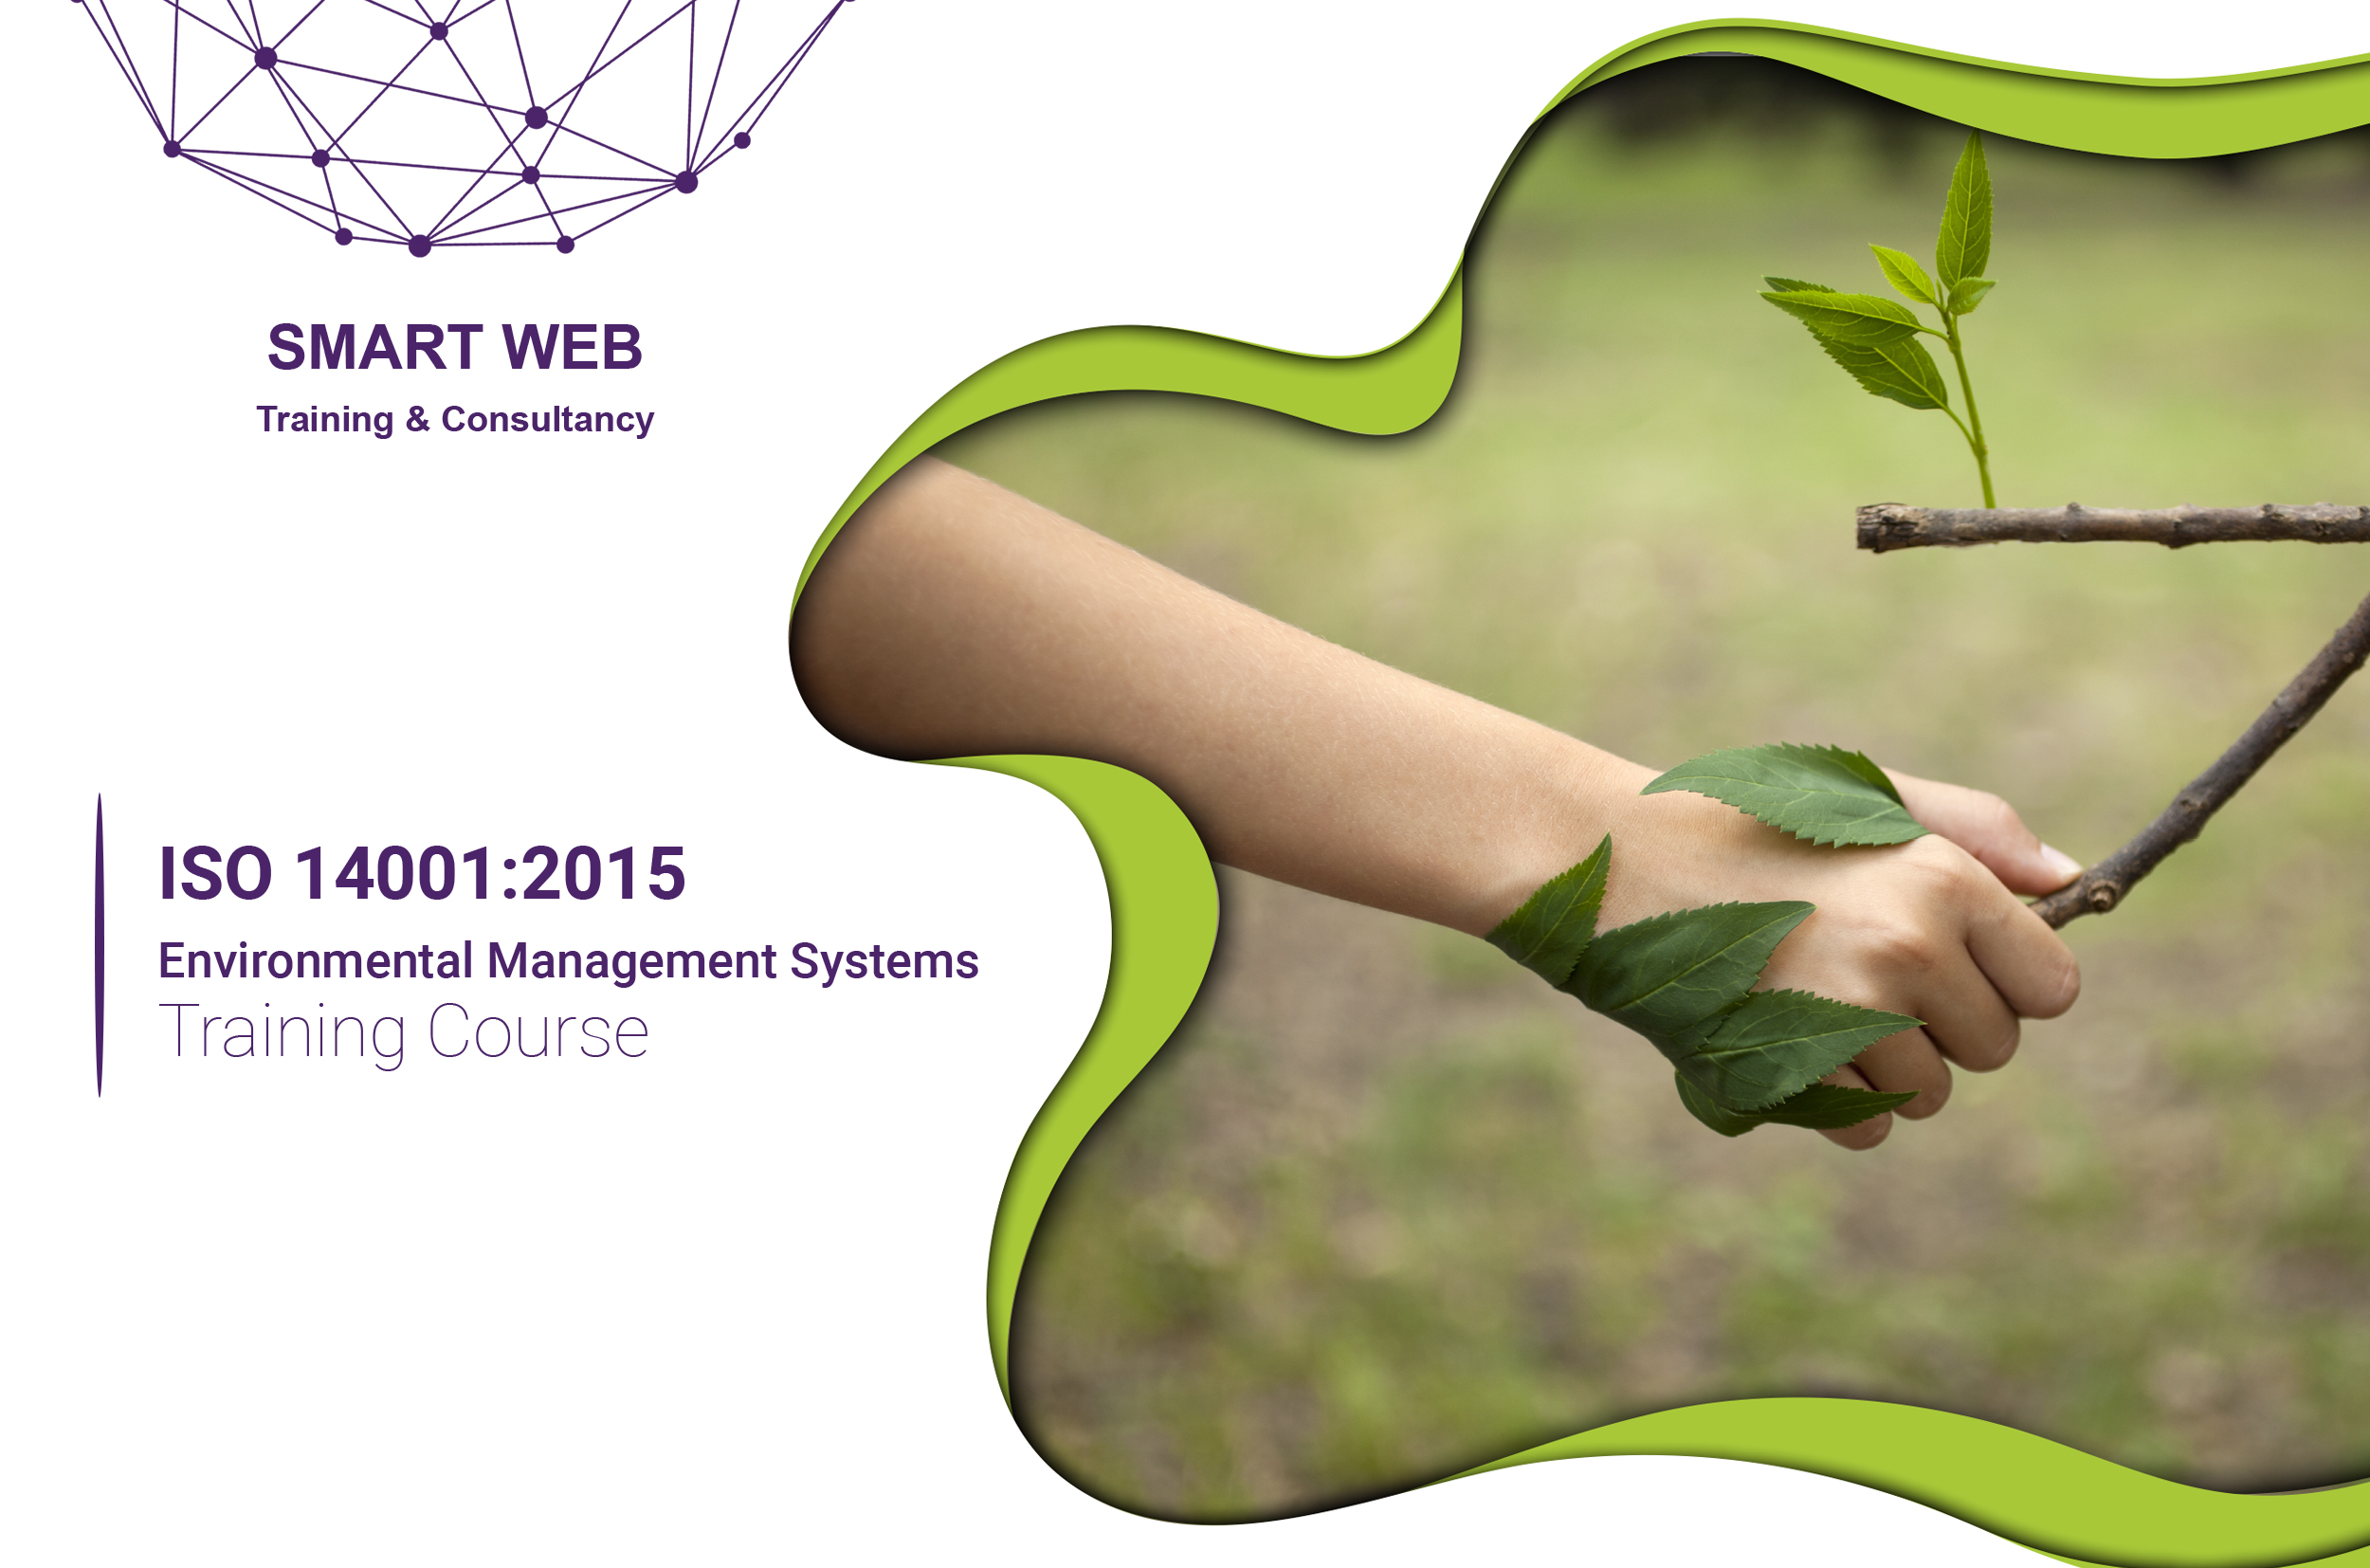 ISO 14001:2015 - Environmental Management Systems - Foundation Training Course